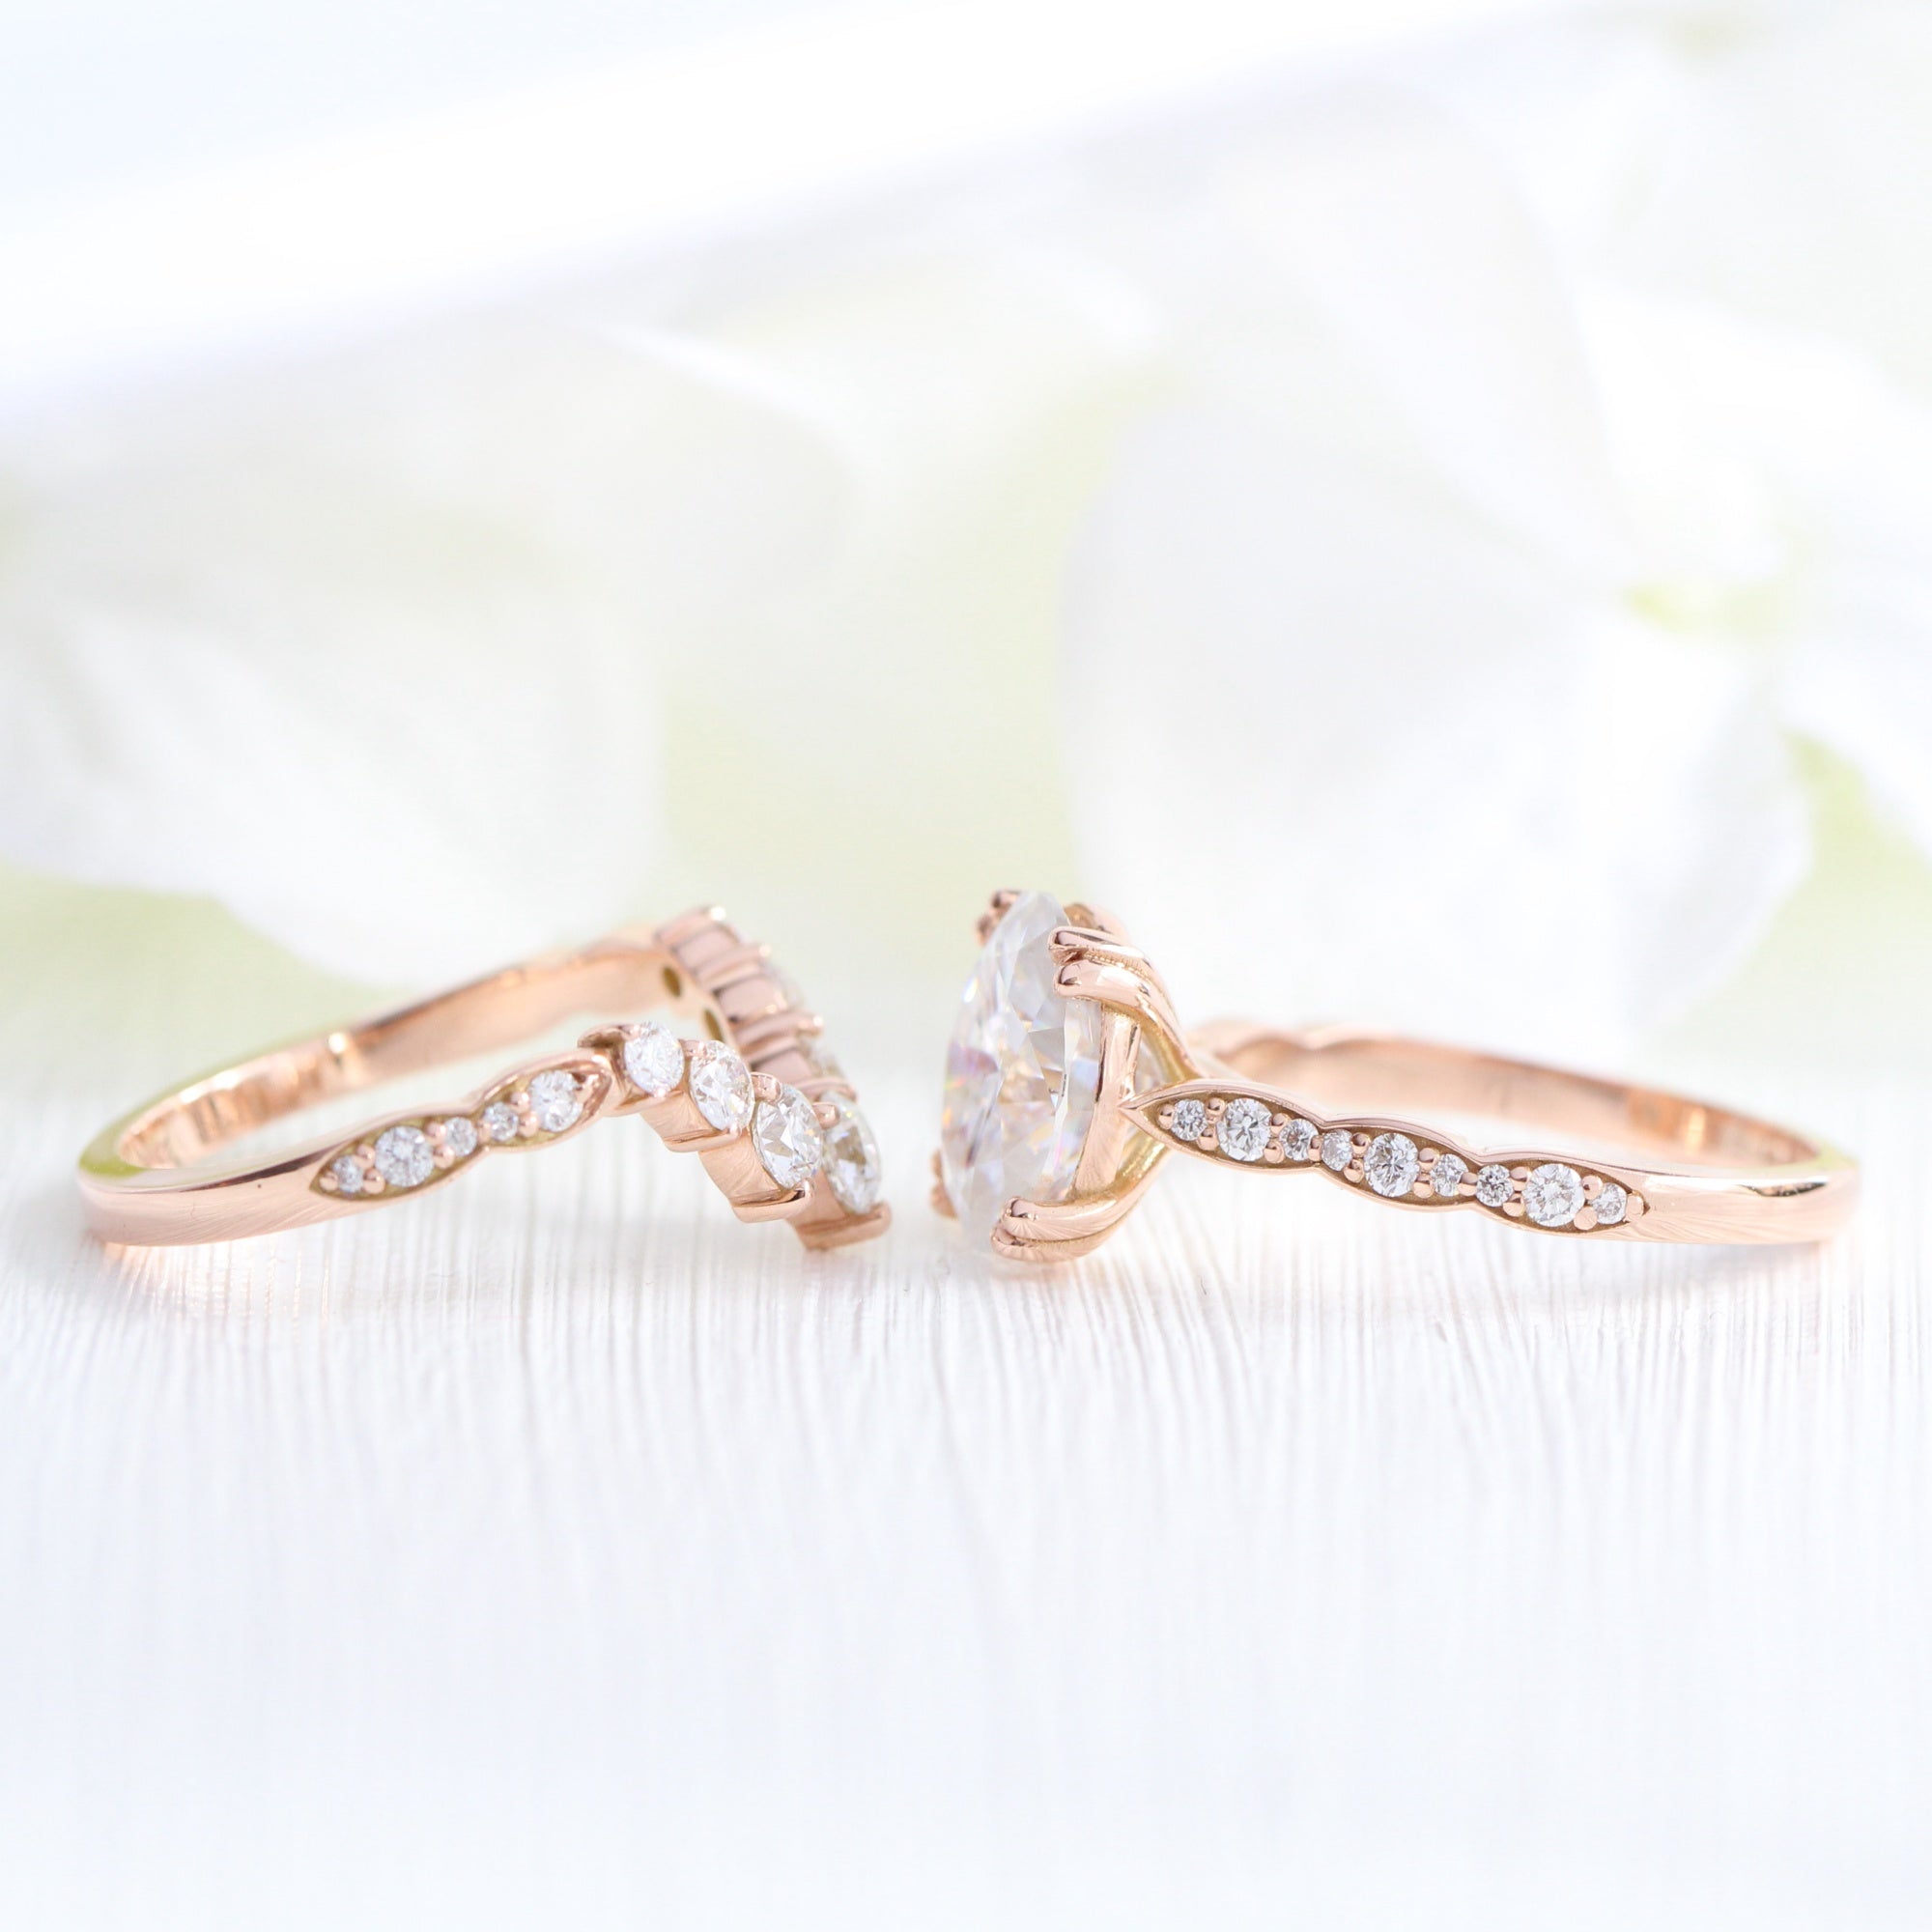 Large oval moissanite solitaire ring rose gold diamond wedding set stacking ring la more design jewelry